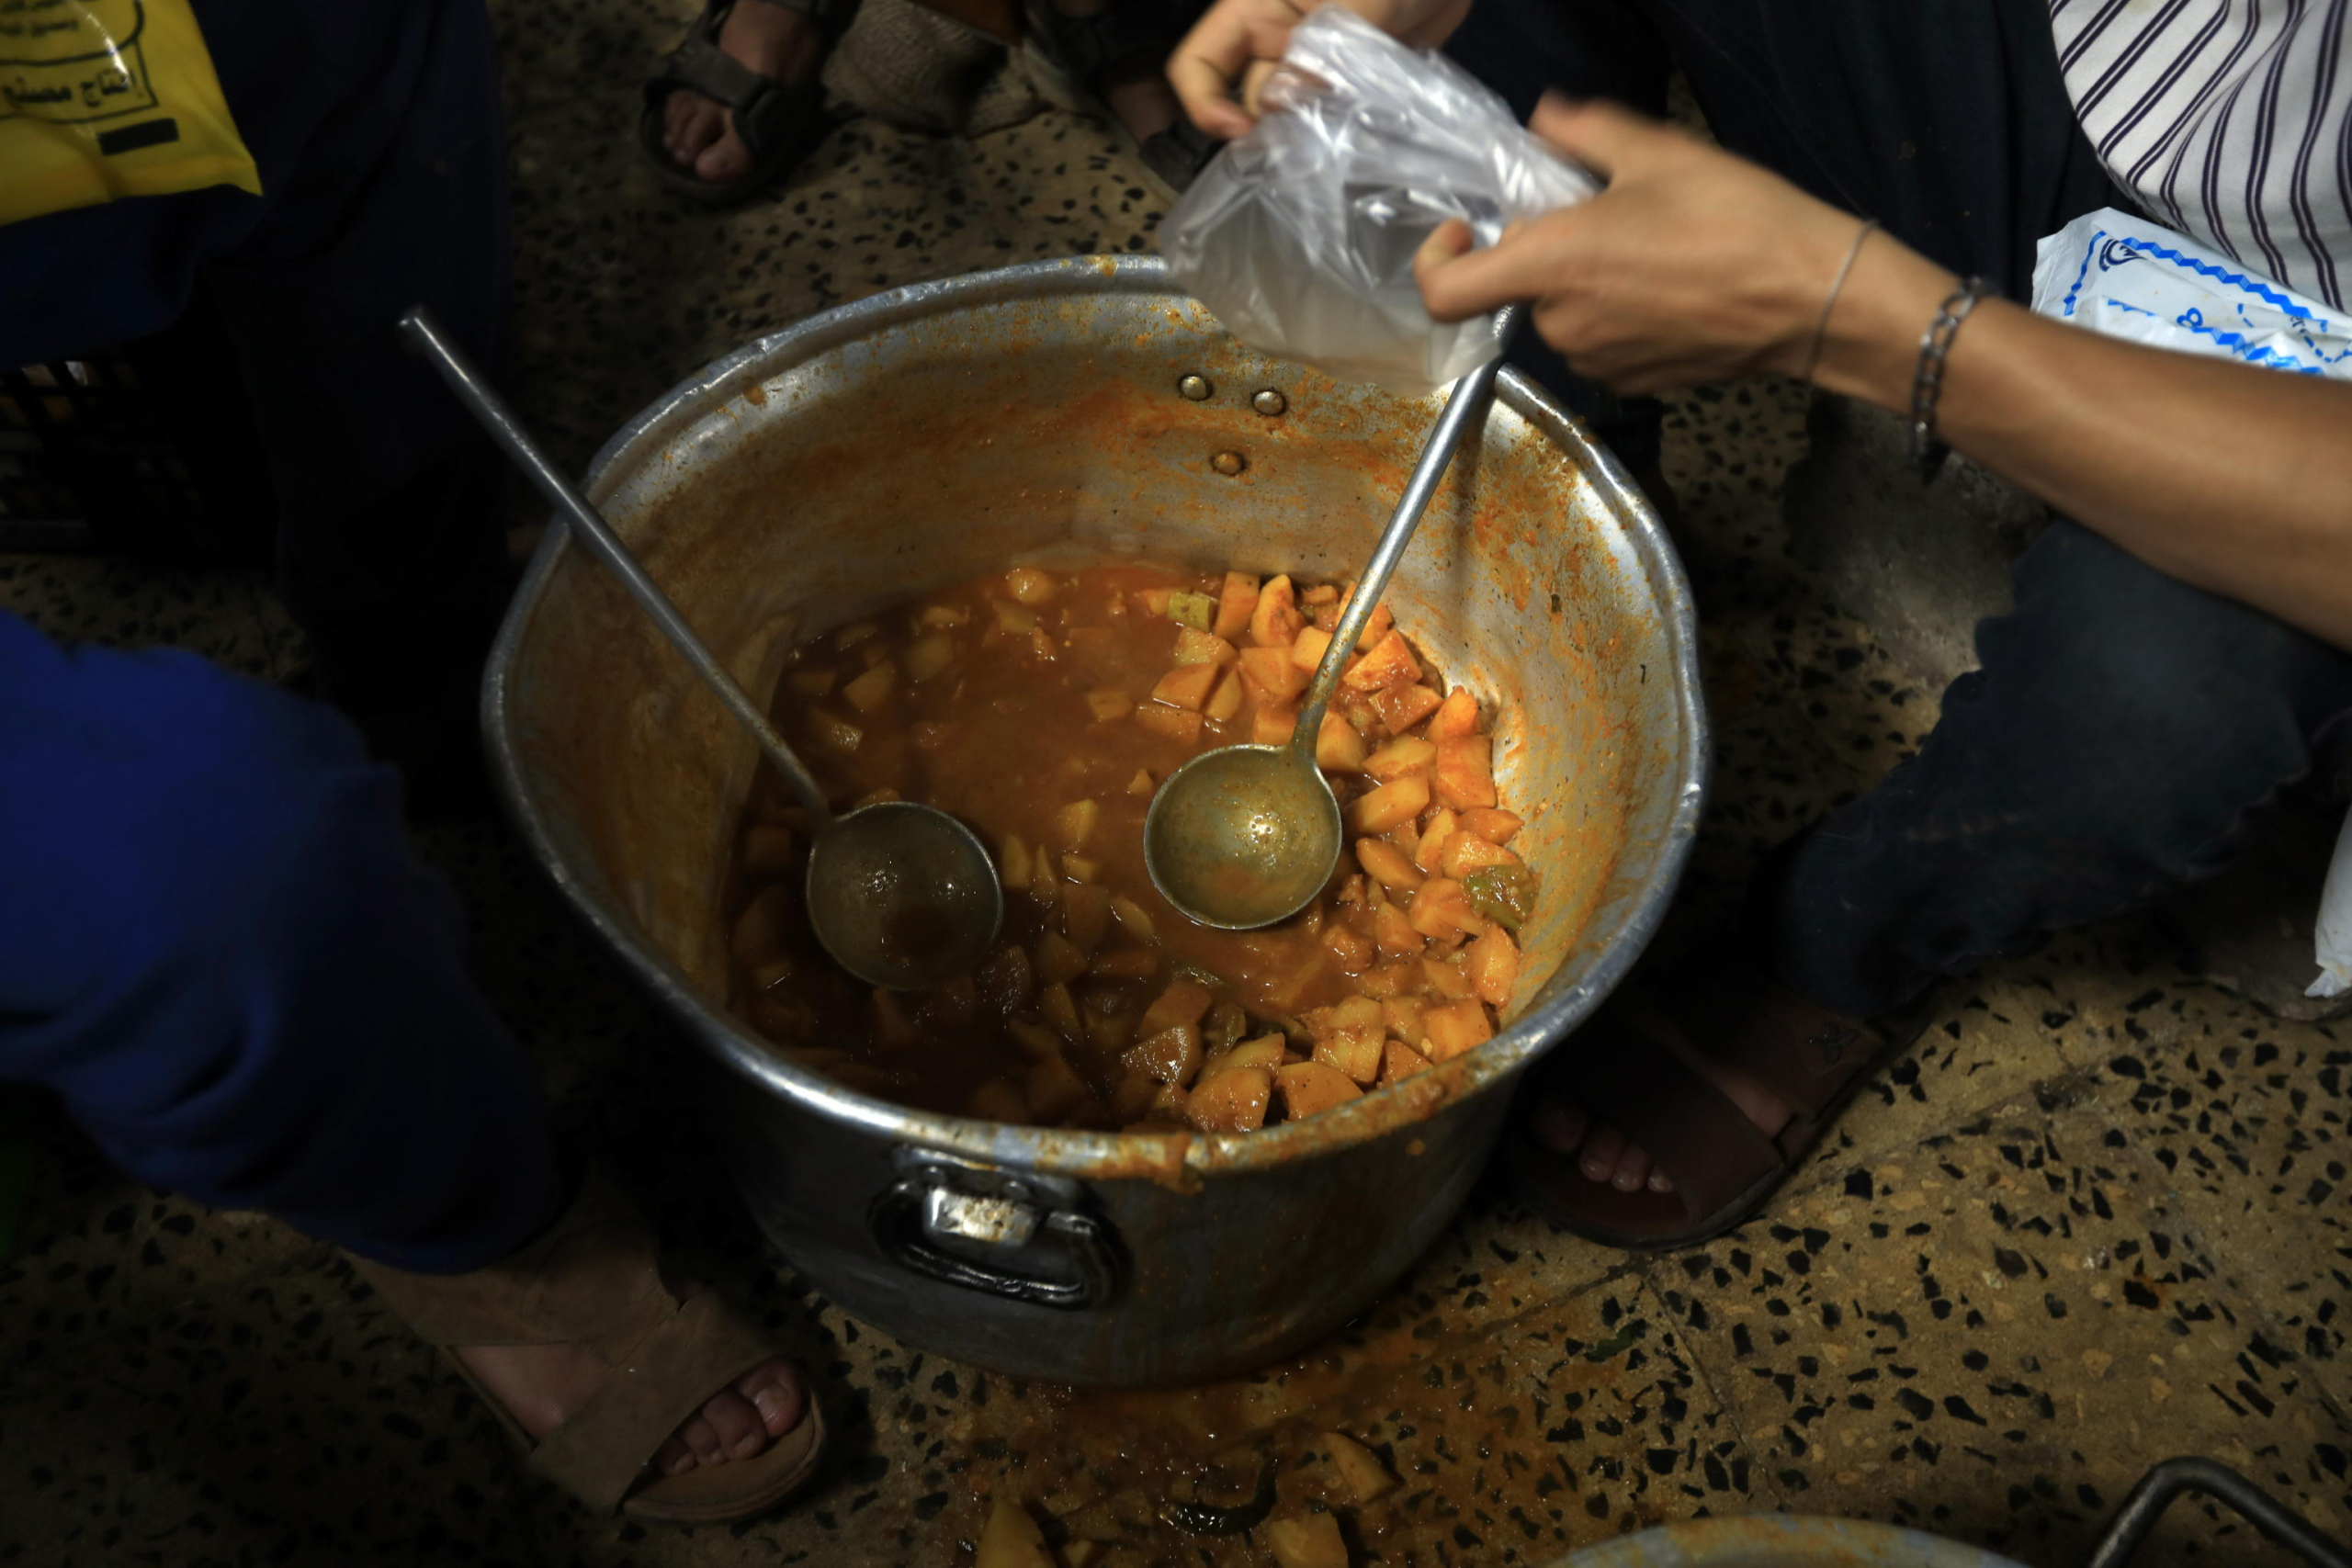 epa11248881 Volunteers prepare food aid for iftar, a meal traditionally taken after sunset to break the Ramadan daily fast during the fasting month of Ramadan, at a charitable kitchen in Sana'a, Yemen, 28 March 2024. More than 2,000 families in the Sana'a neighborhood receive daily food aid, including rice, cooked vegetables, and bread, provided by a charitable kitchen during the fasting month of Ramadan. The Muslims' holy month of Ramadan is the ninth month in the Islamic calendar, and it is believed that the revelation of the first verse in the Koran took place during the last ten nights. It is celebrated yearly by praying during the night time and abstaining from eating, drinking, and sexual acts during the period between sunrise and sunset. It is also a time for socializing, mainly in the evening after breaking the fast and a shift of all activities to late in the day in most countries.  EPA/YAHYA ARHAB